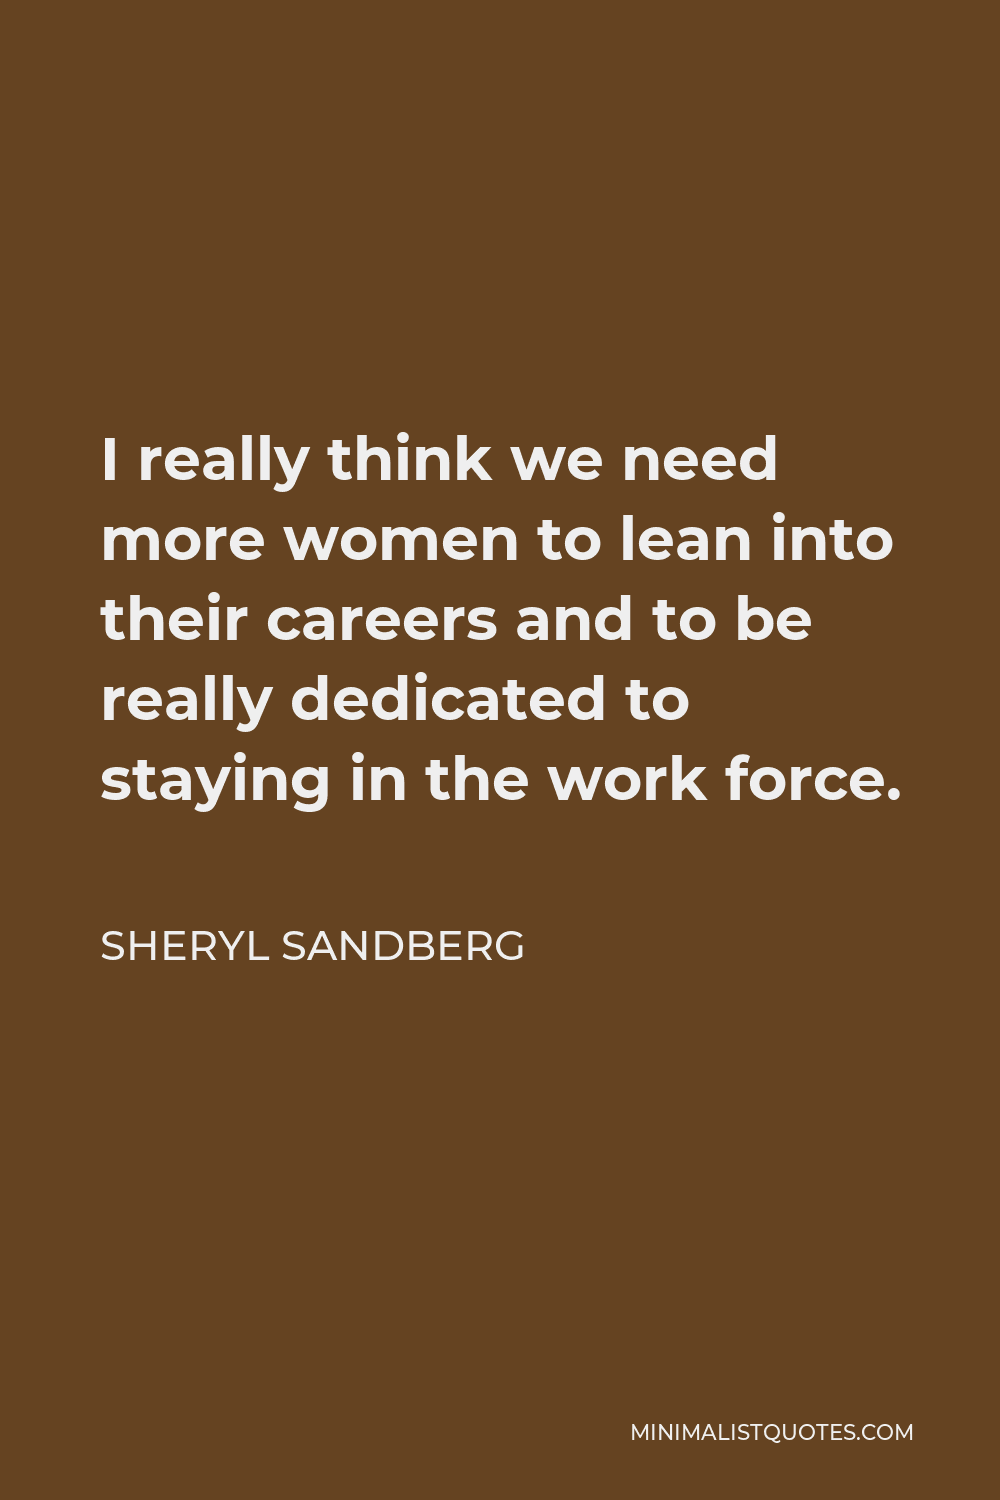 Sheryl Sandberg Quote - I really think we need more women to lean into their careers and to be really dedicated to staying in the work force.